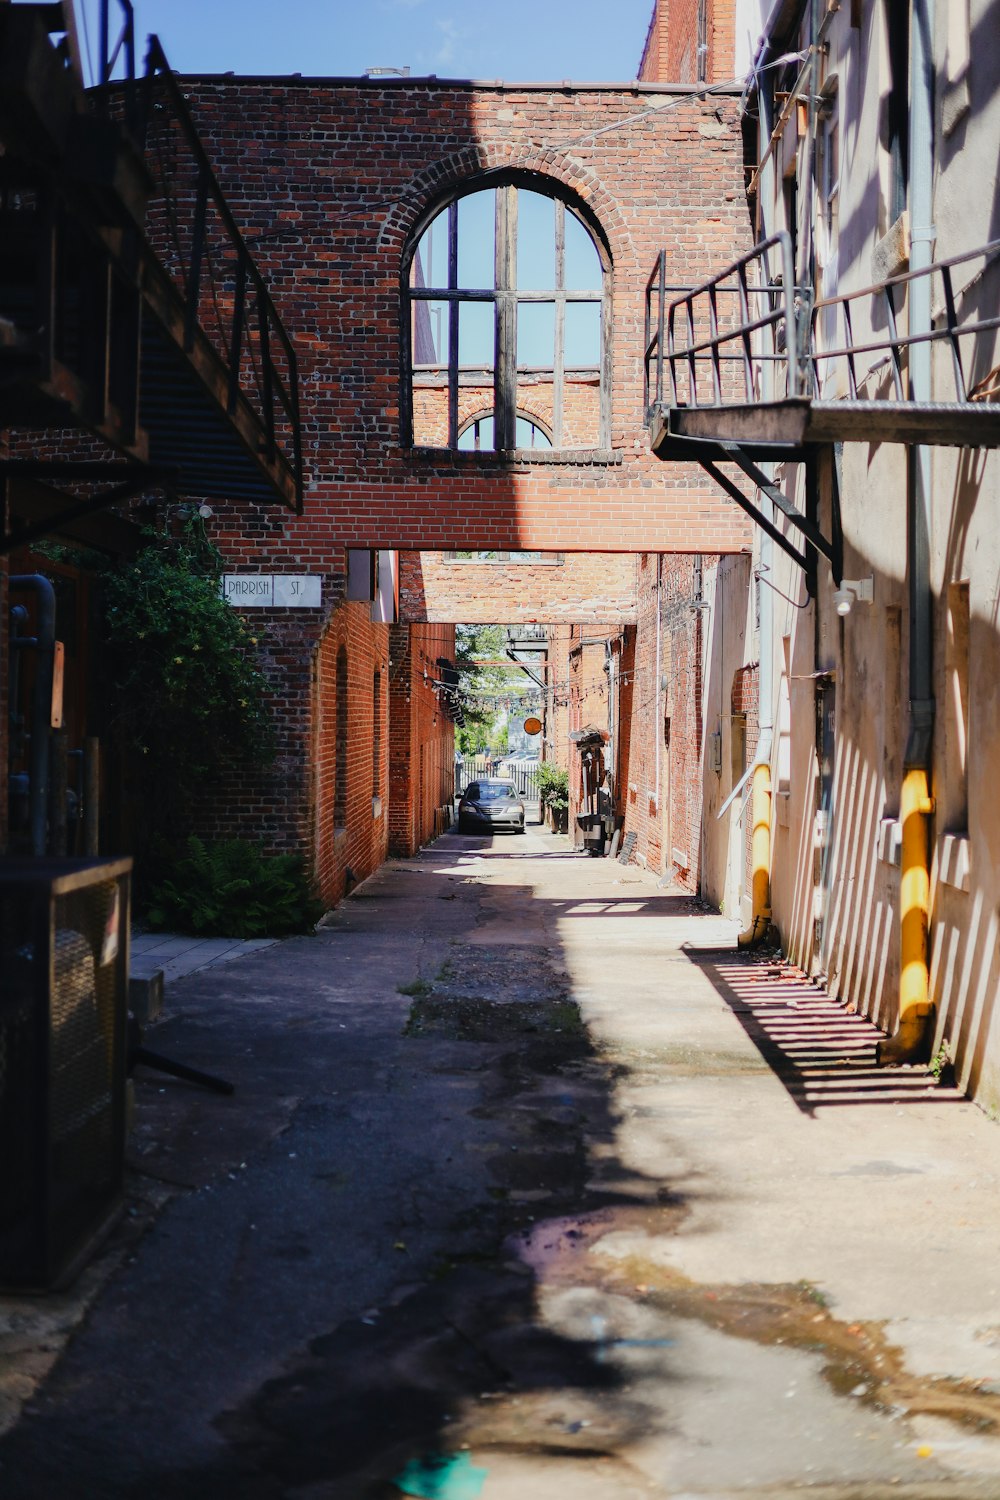 a narrow alley way with a brick building in the background